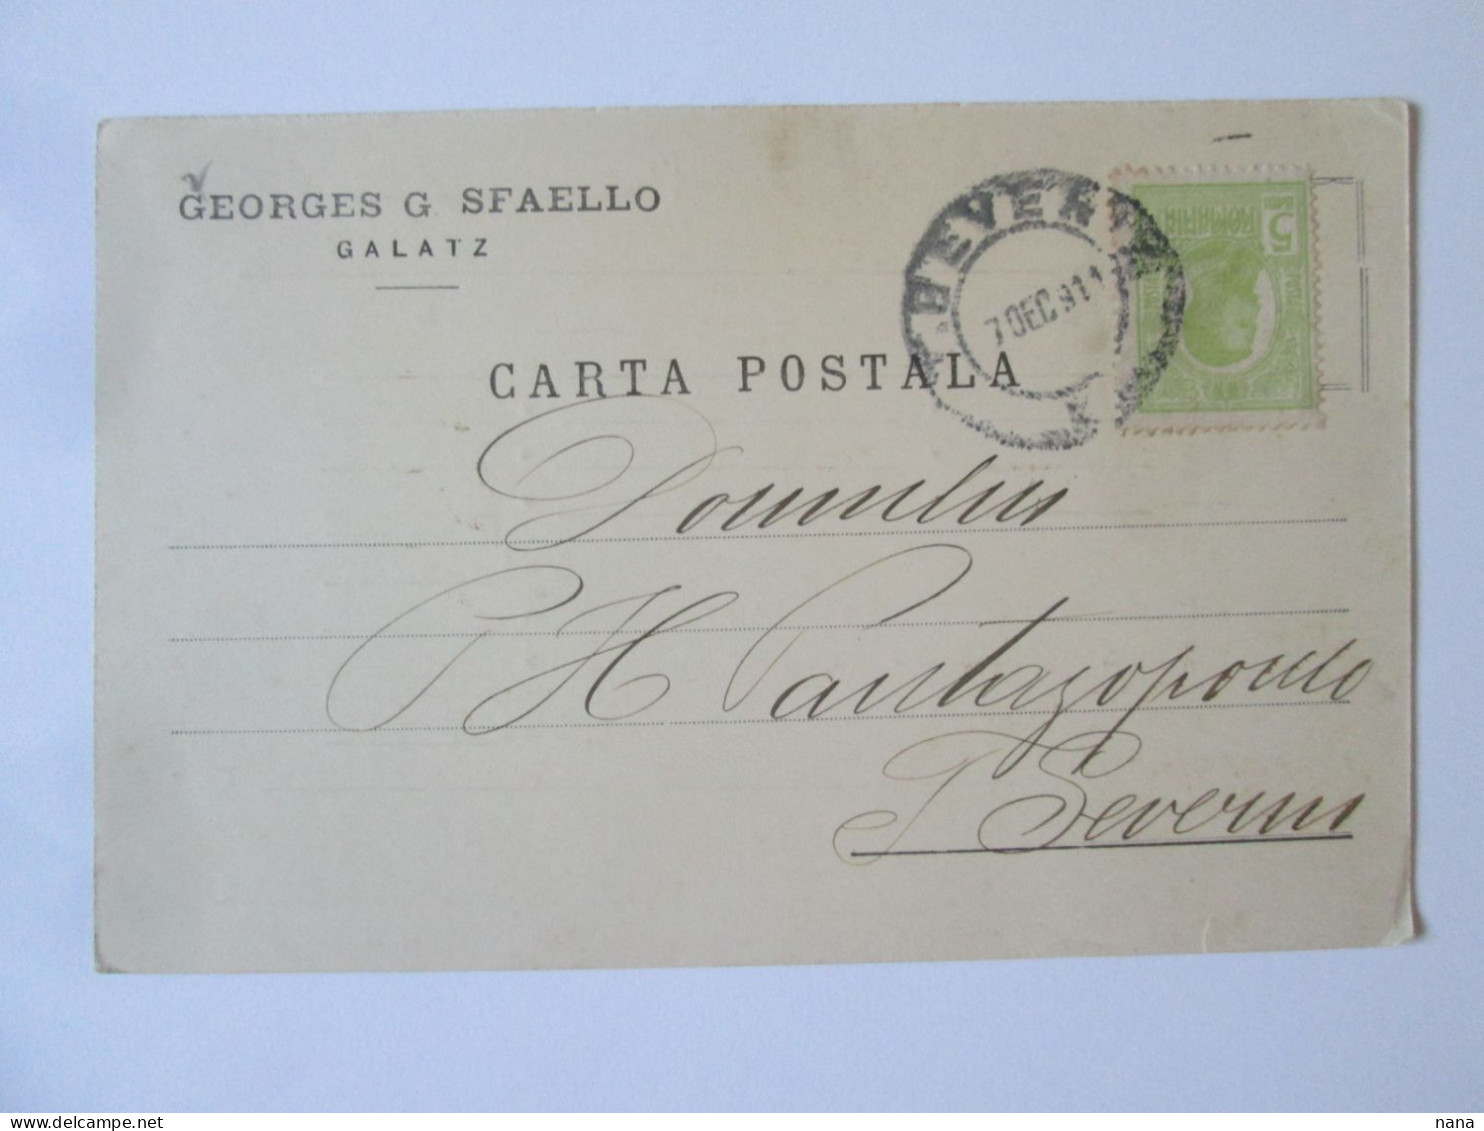 Roumanie Entier Postal Georges Sfaello-Galati Voyage 1911/Romania:Galati-Georges Sfaello Stationery Post.1911 Mailed - Covers & Documents